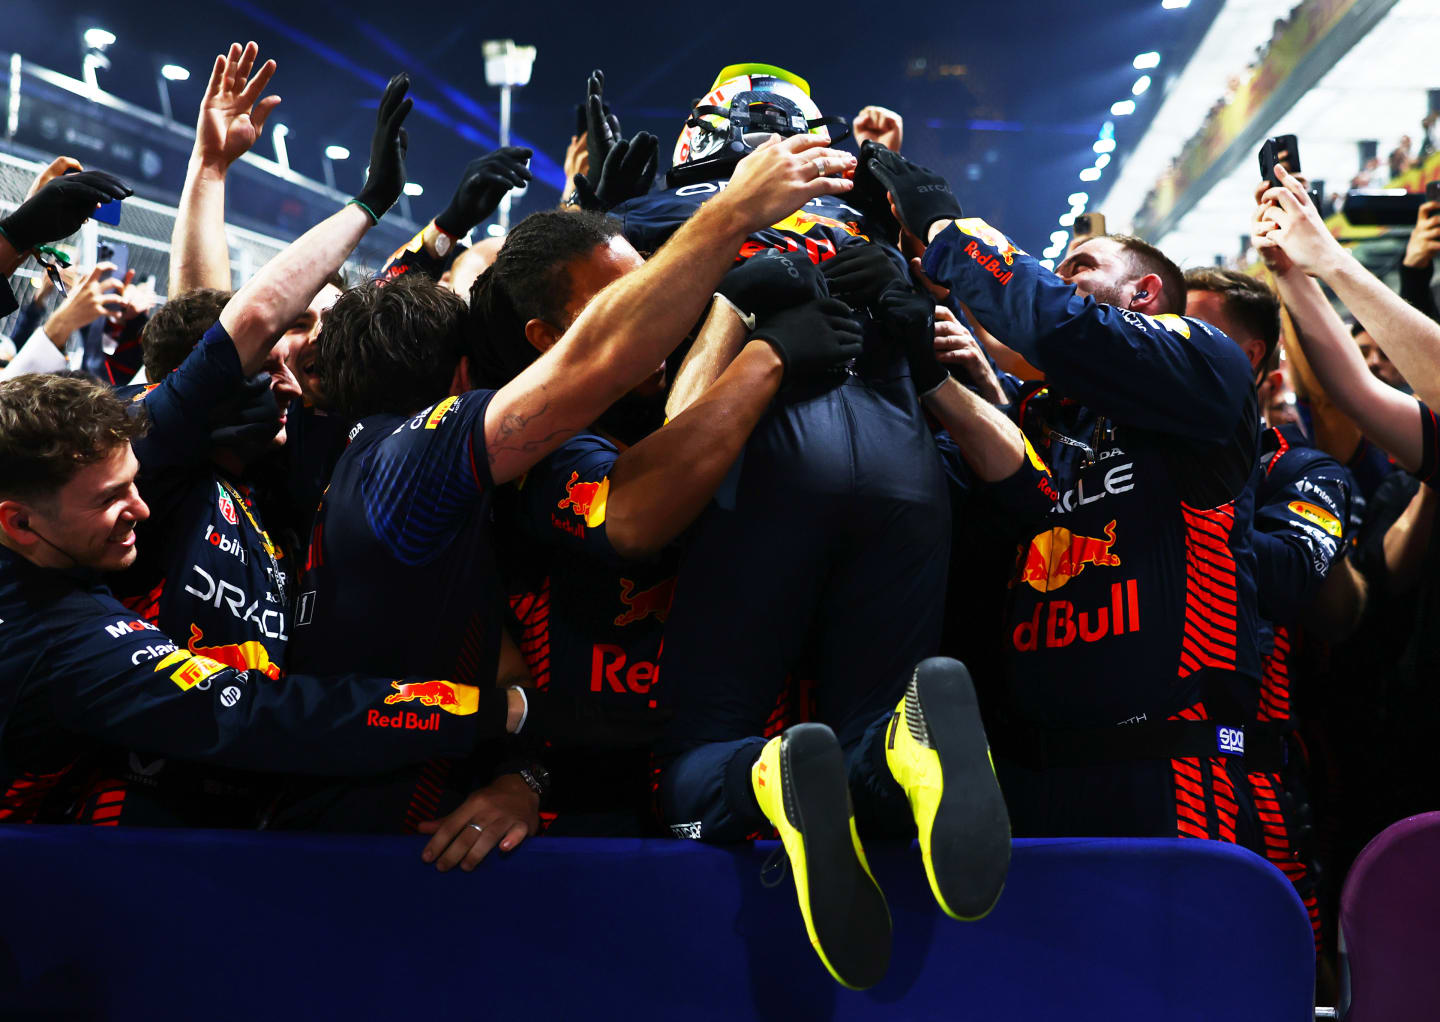 JEDDAH, SAUDI ARABIA - MARCH 19: Race winner Sergio Perez of Mexico and Oracle Red Bull Racing celebrates in parc ferme during the F1 Grand Prix of Saudi Arabia at Jeddah Corniche Circuit on March 19, 2023 in Jeddah, Saudi Arabia. (Photo by Mark Thompson/Getty Images)